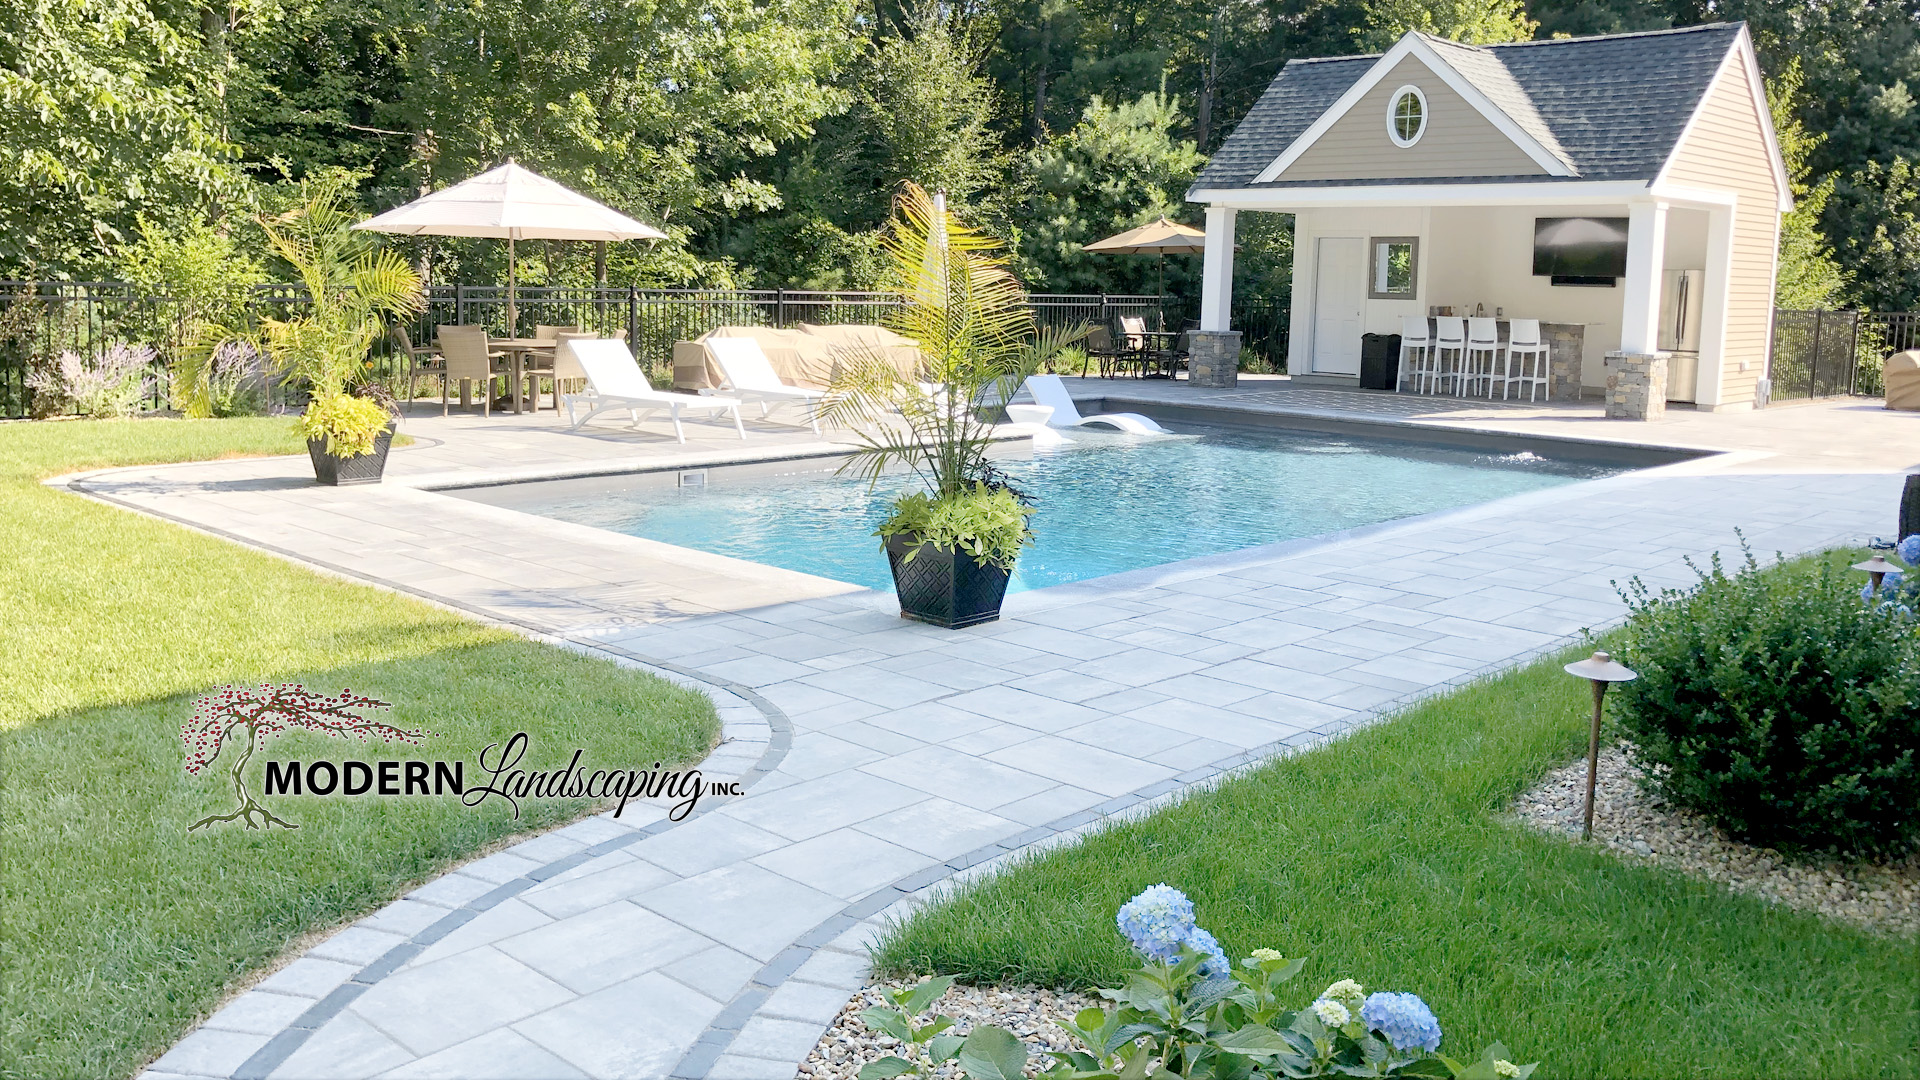 Landscaping Easton, Pool contractors, Modern Landscaping Inc